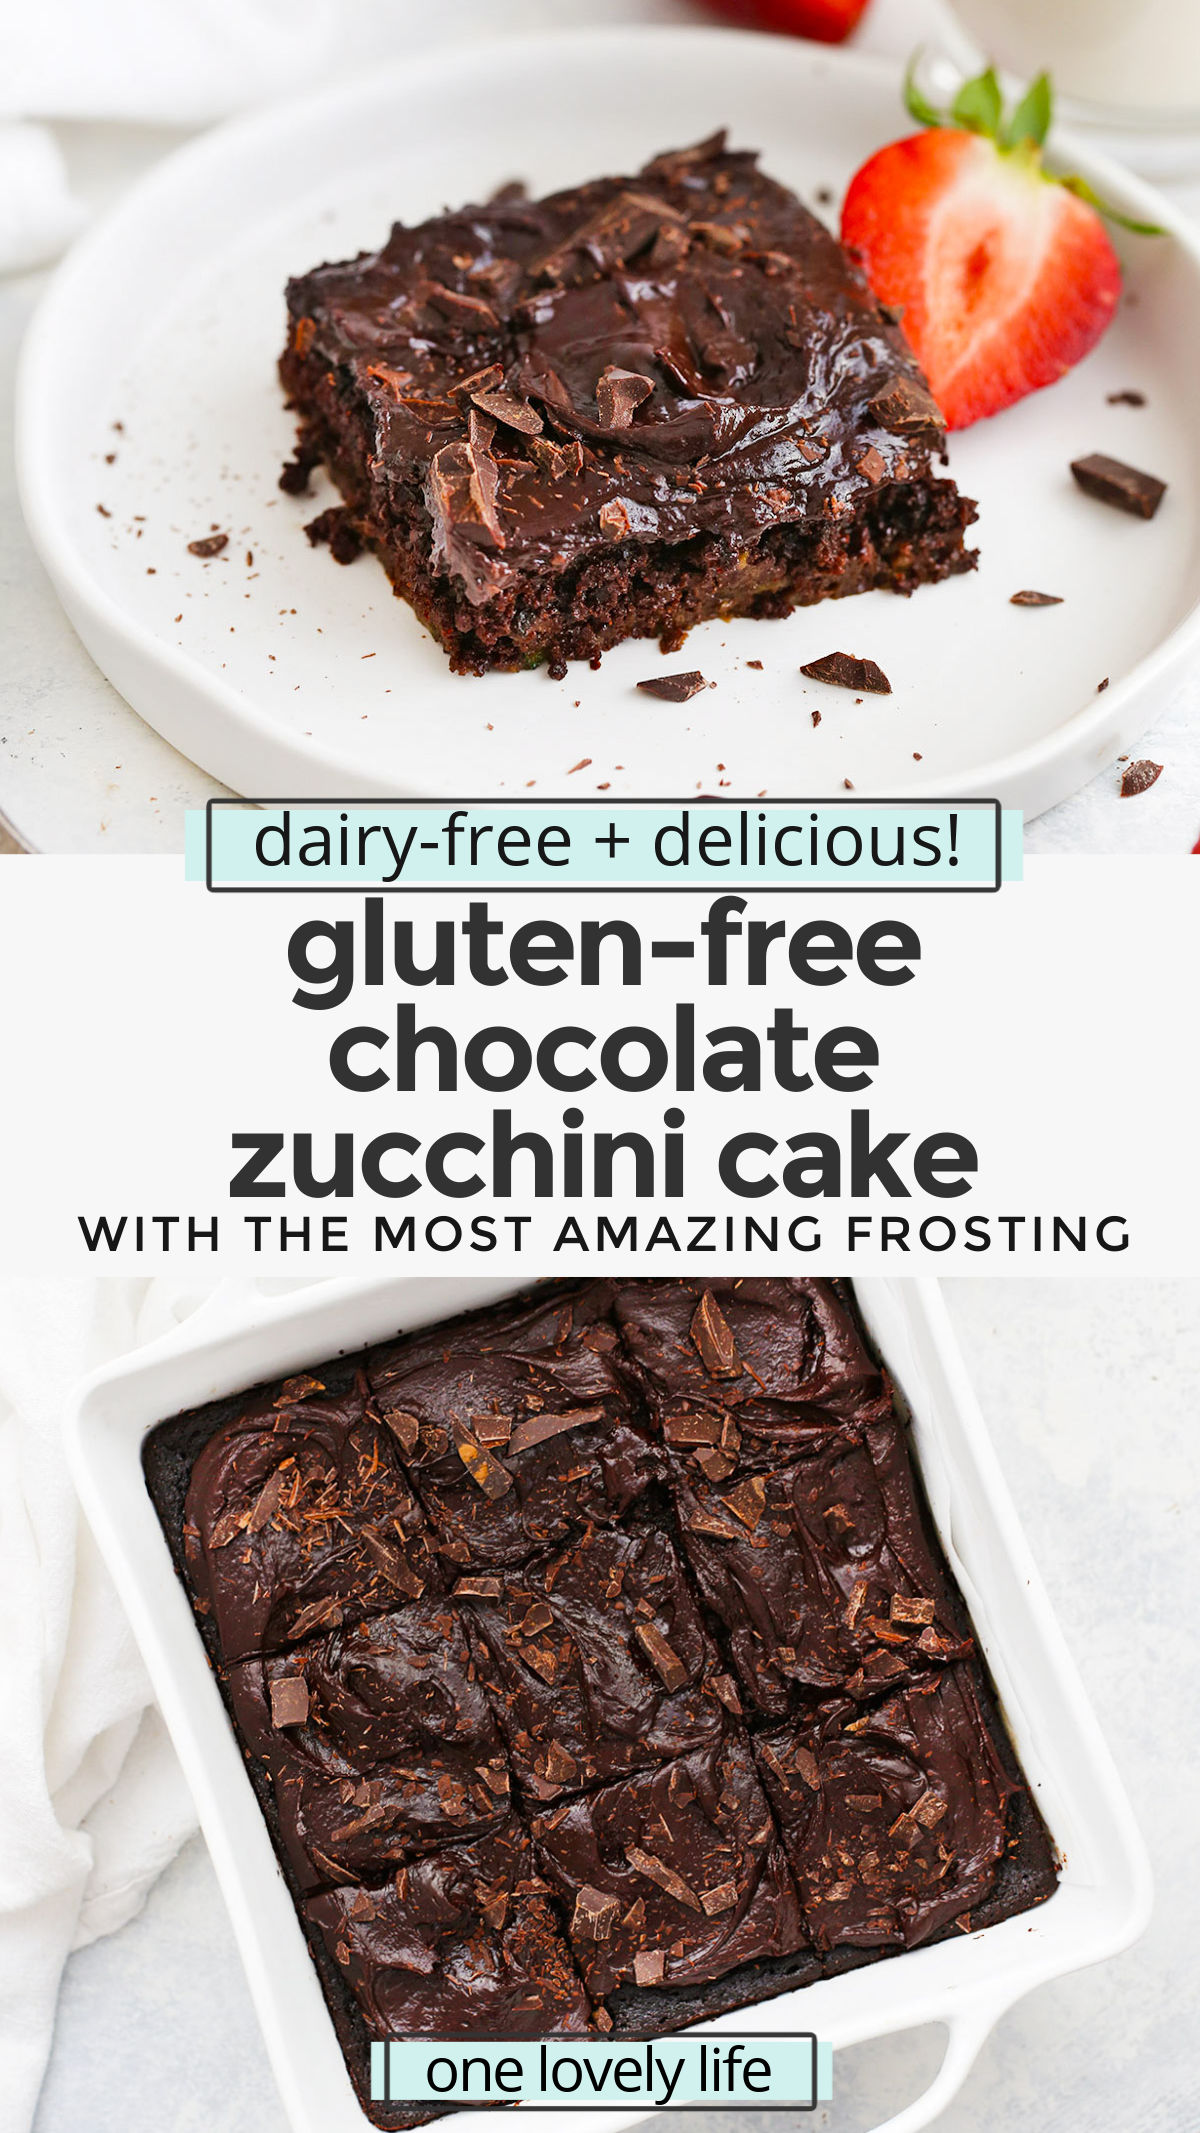 The BEST Gluten Free Chocolate Zucchini Cake. This gorgeous almond flour chocolate zucchini cake is packed with chocolate flavor. It's rich and decadent and 100% naturally sweetened! You'll love the paleo chocolate frosting! // gluten free cake recipe // gluten free chocolate cake recipe // dairy free chocolate cake recipe // almond flour cake // gluten free zucchini cake recipe // paleo chocolate zucchini cake recipe